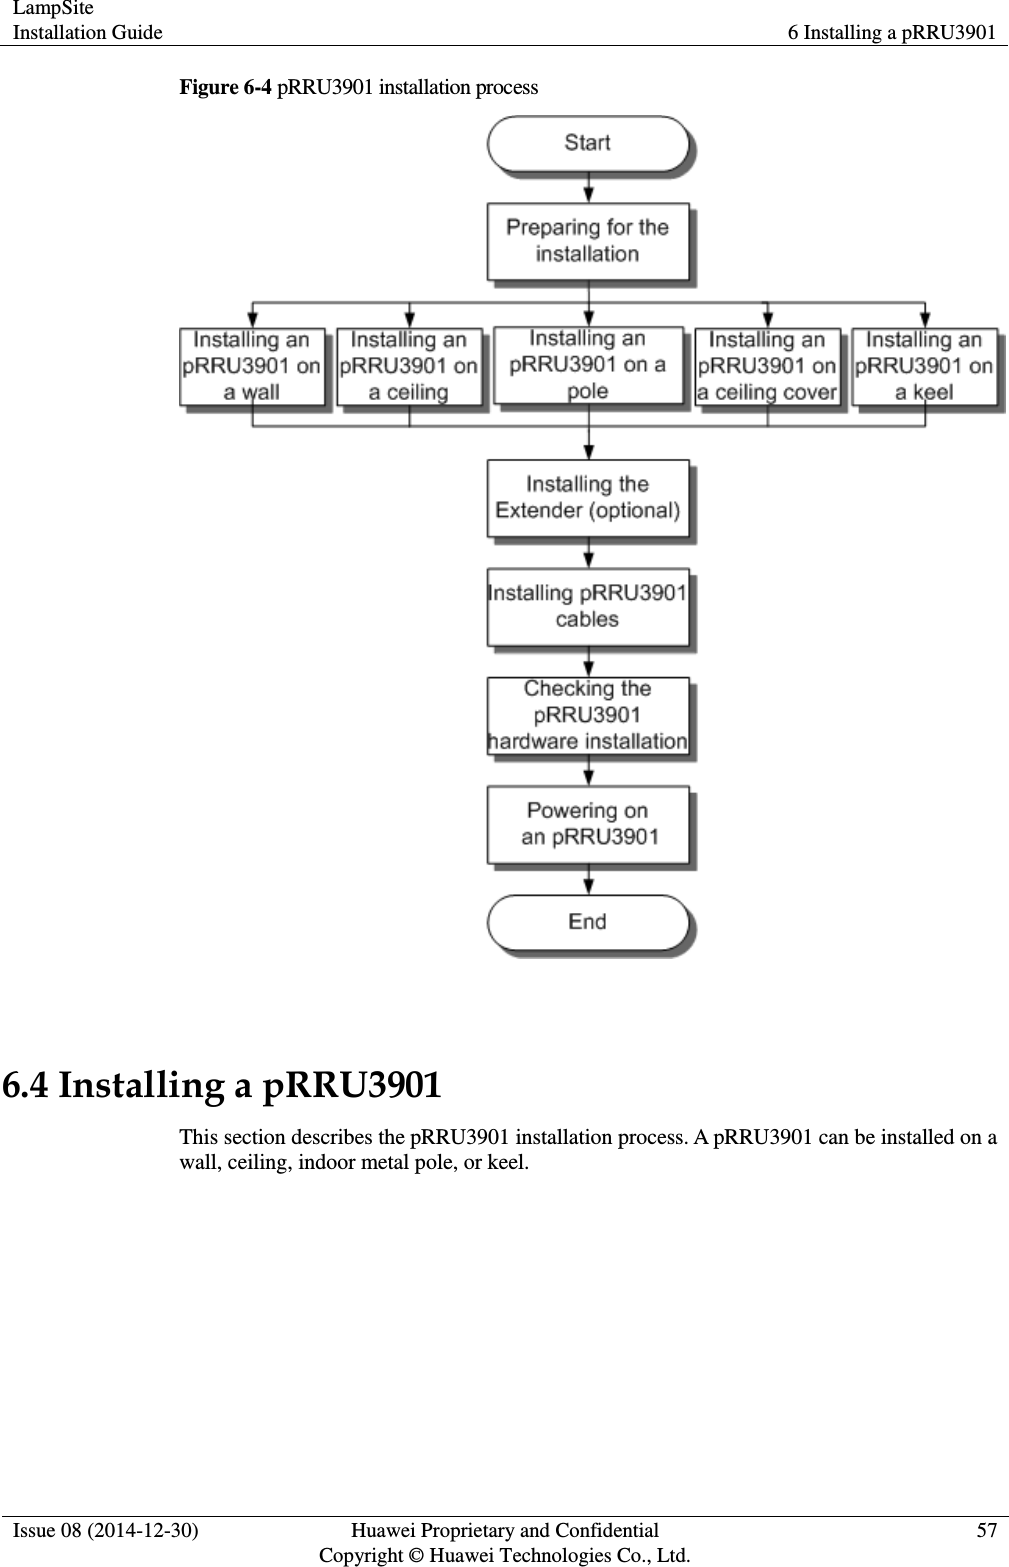 LampSite Installation Guide 6 Installing a pRRU3901  Issue 08 (2014-12-30) Huawei Proprietary and Confidential                                     Copyright © Huawei Technologies Co., Ltd. 57  Figure 6-4 pRRU3901 installation process     6.4 Installing a pRRU3901 This section describes the pRRU3901 installation process. A pRRU3901 can be installed on a wall, ceiling, indoor metal pole, or keel.   